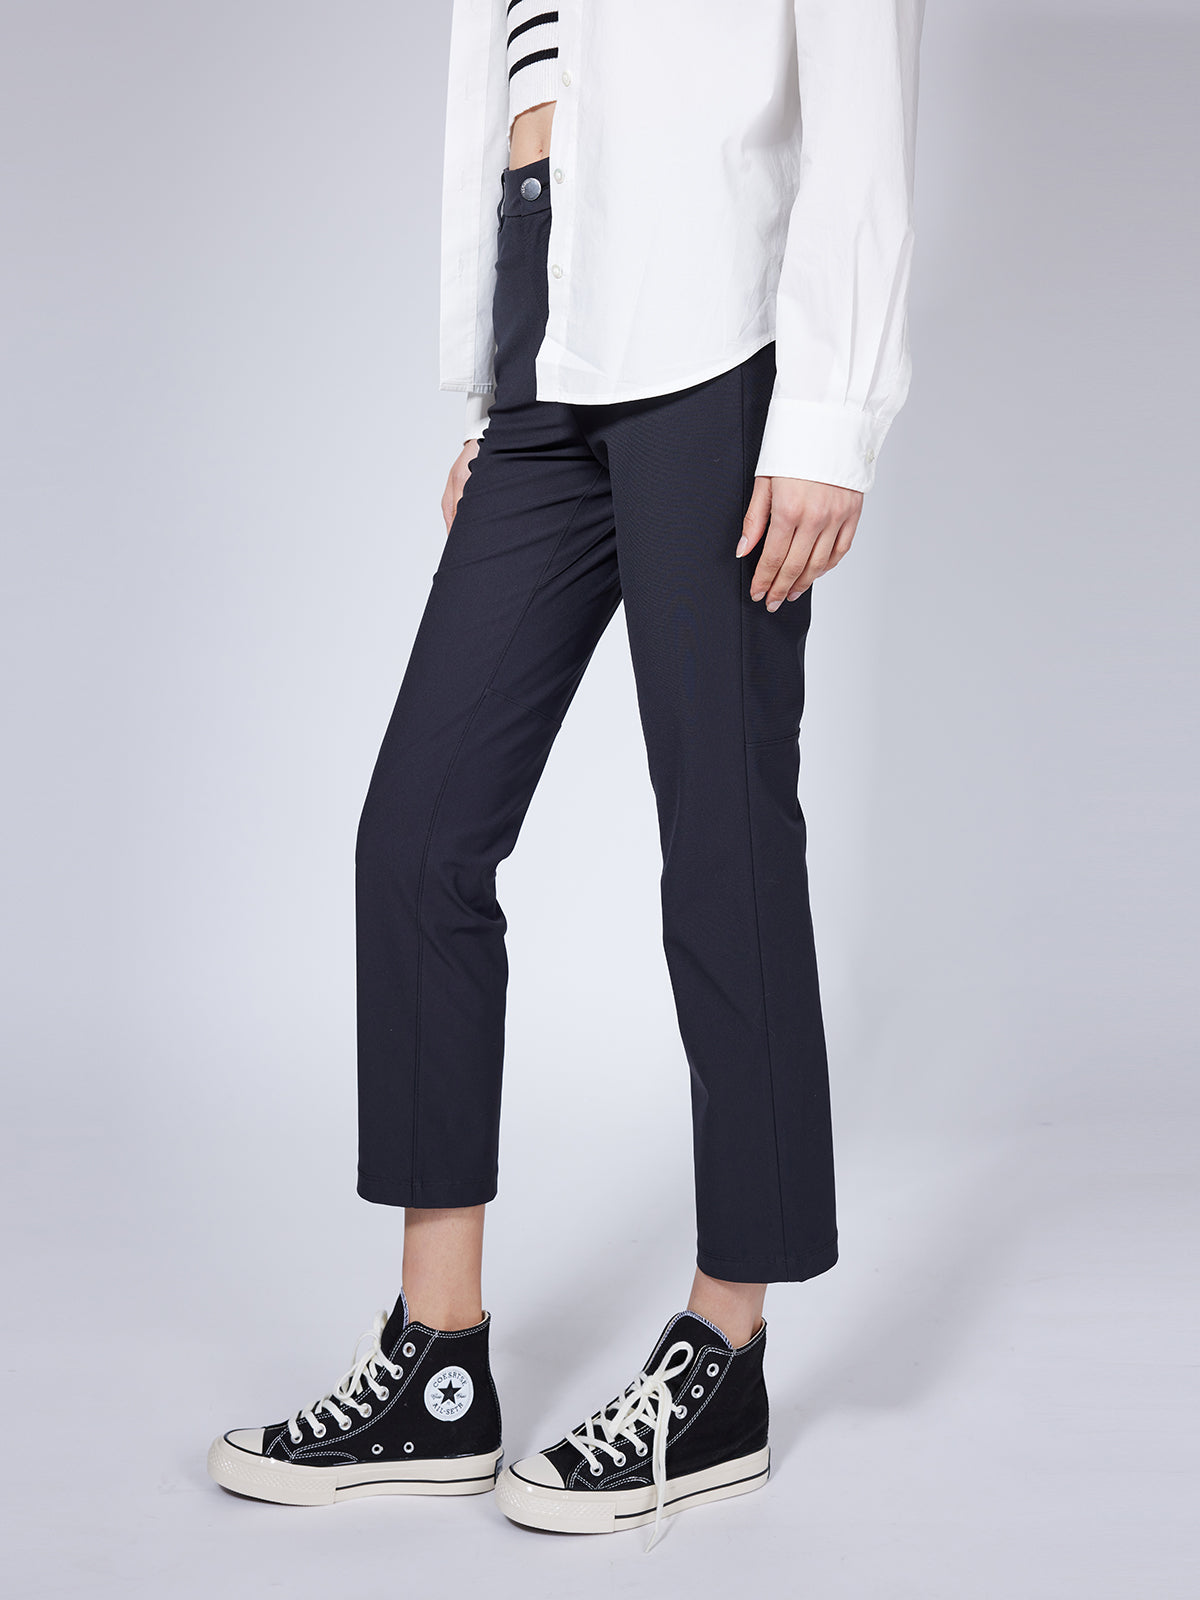 Professional Style Tapered Trousers Suitable for Work